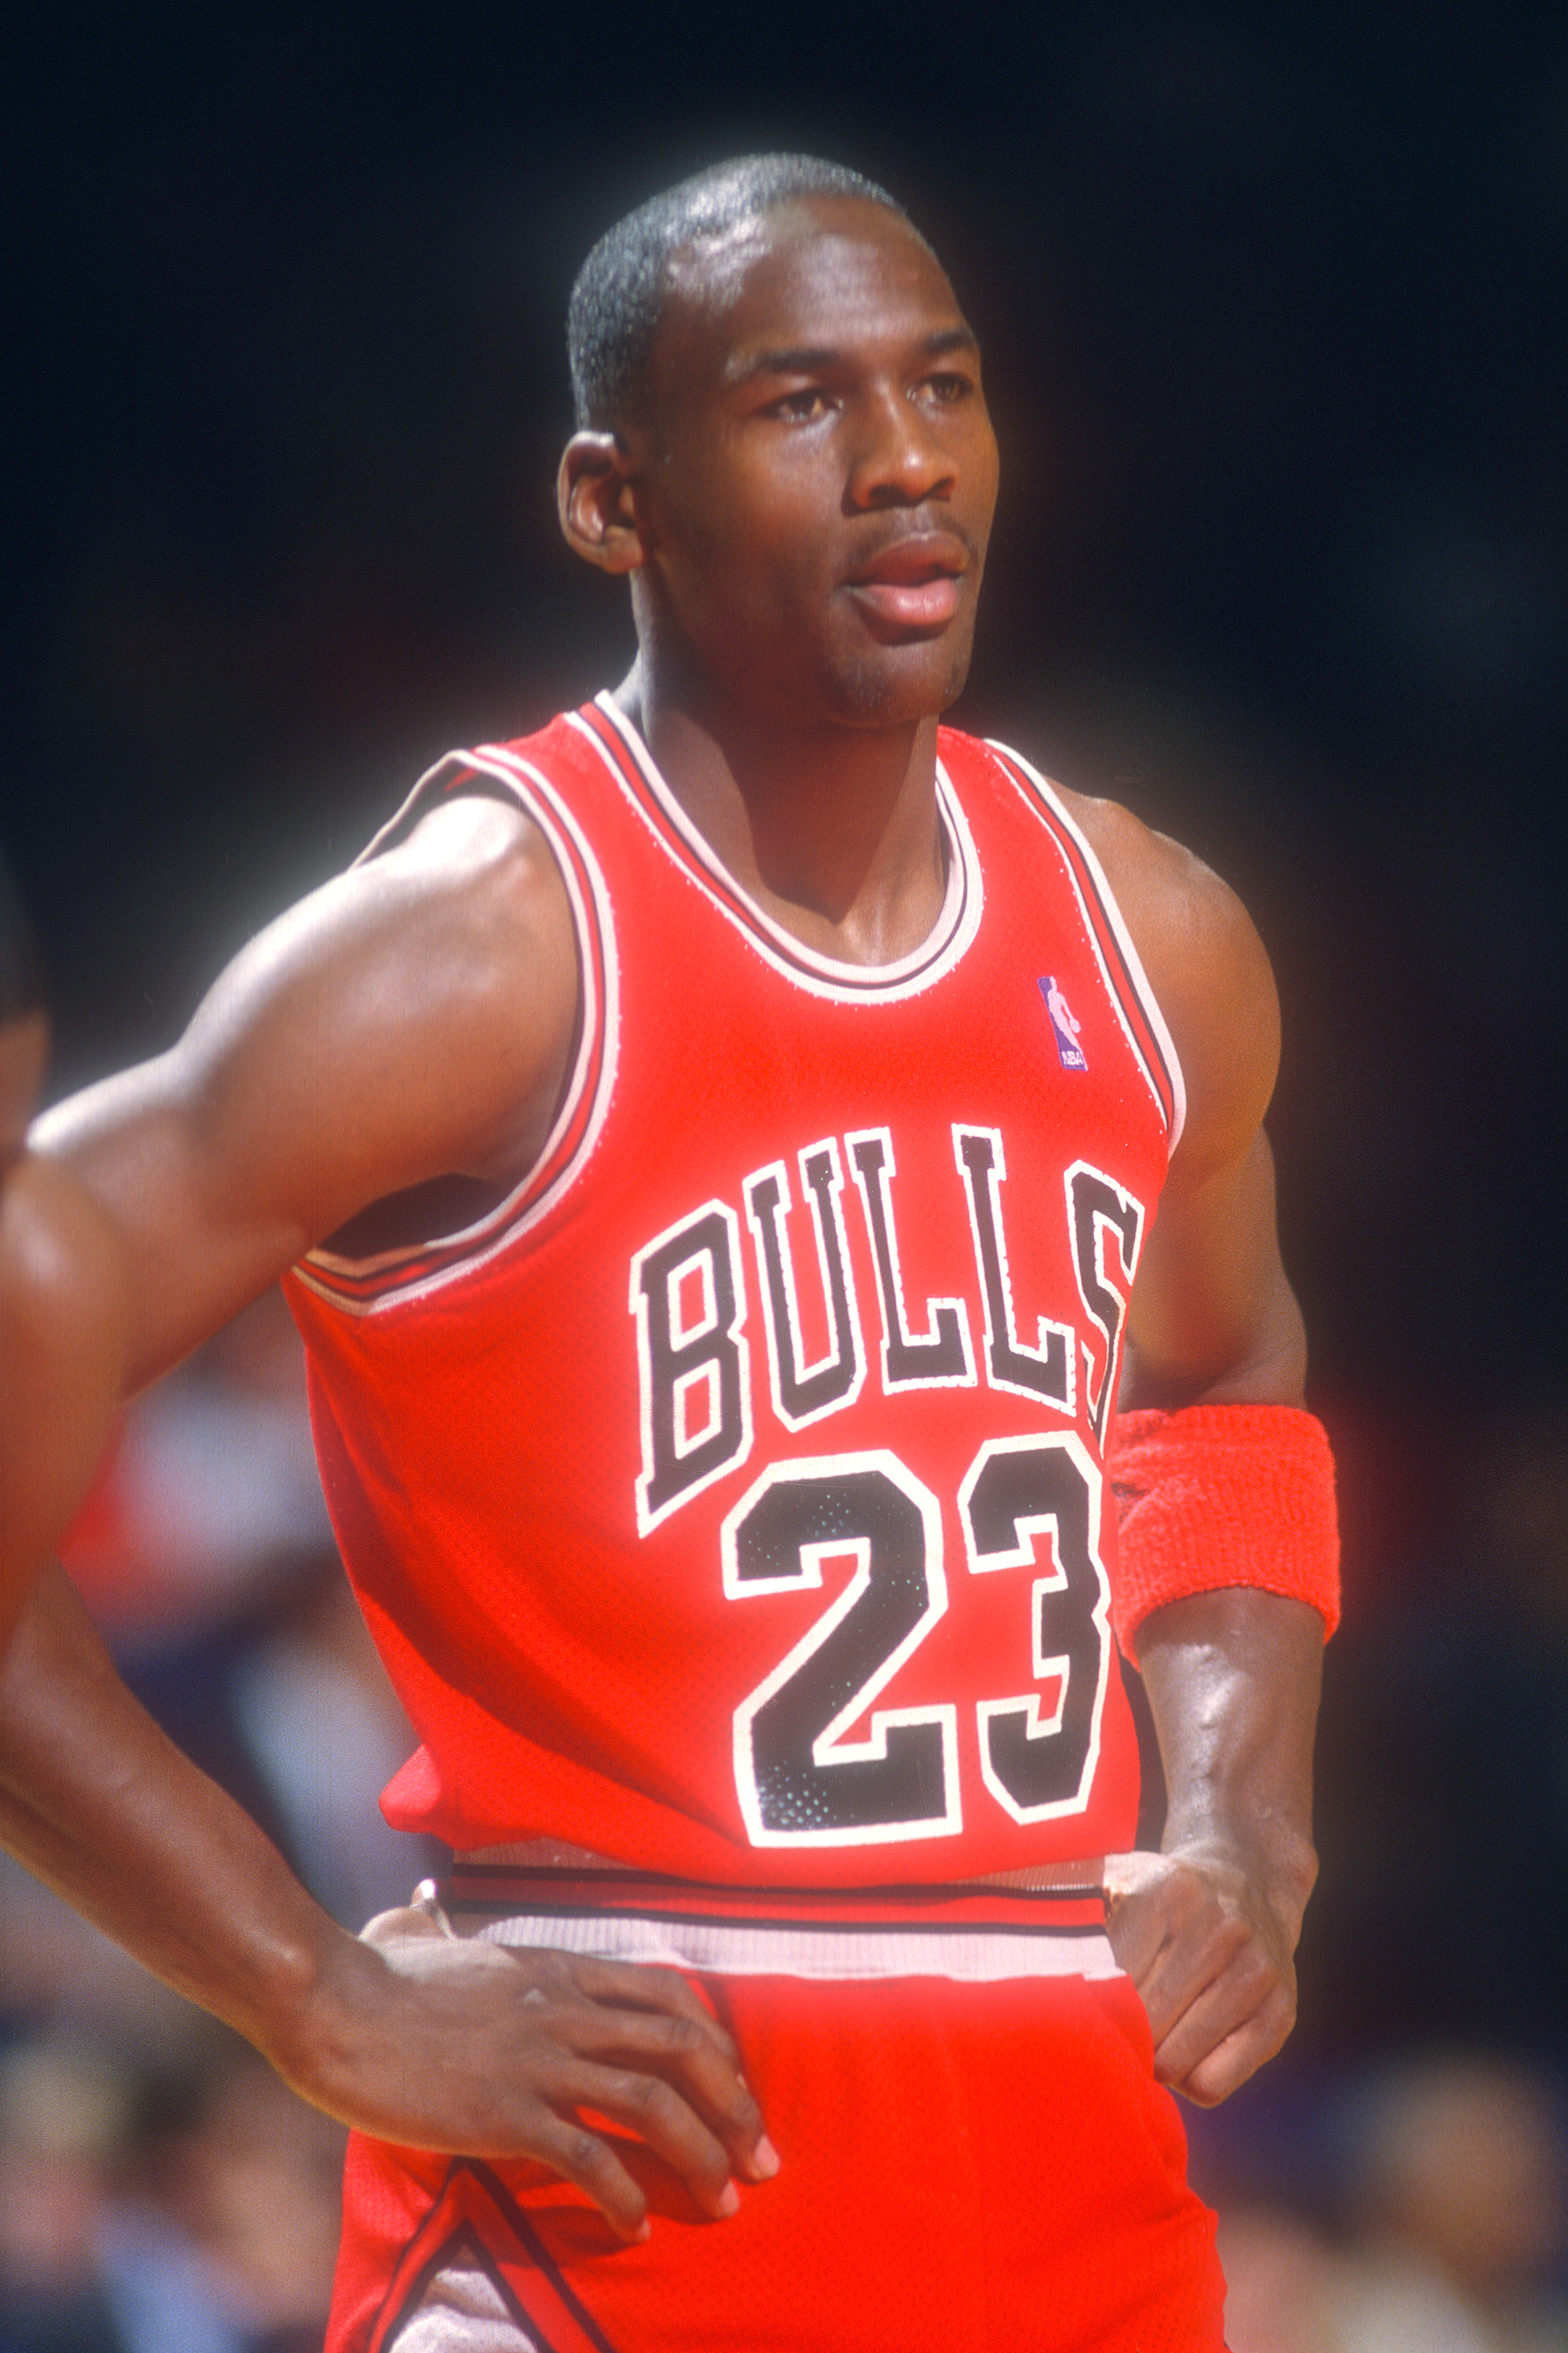 Michael Jordan during a basketball game at the Capital Centre on December 30, 1989 in Landover, Maryland | Source: Getty Images